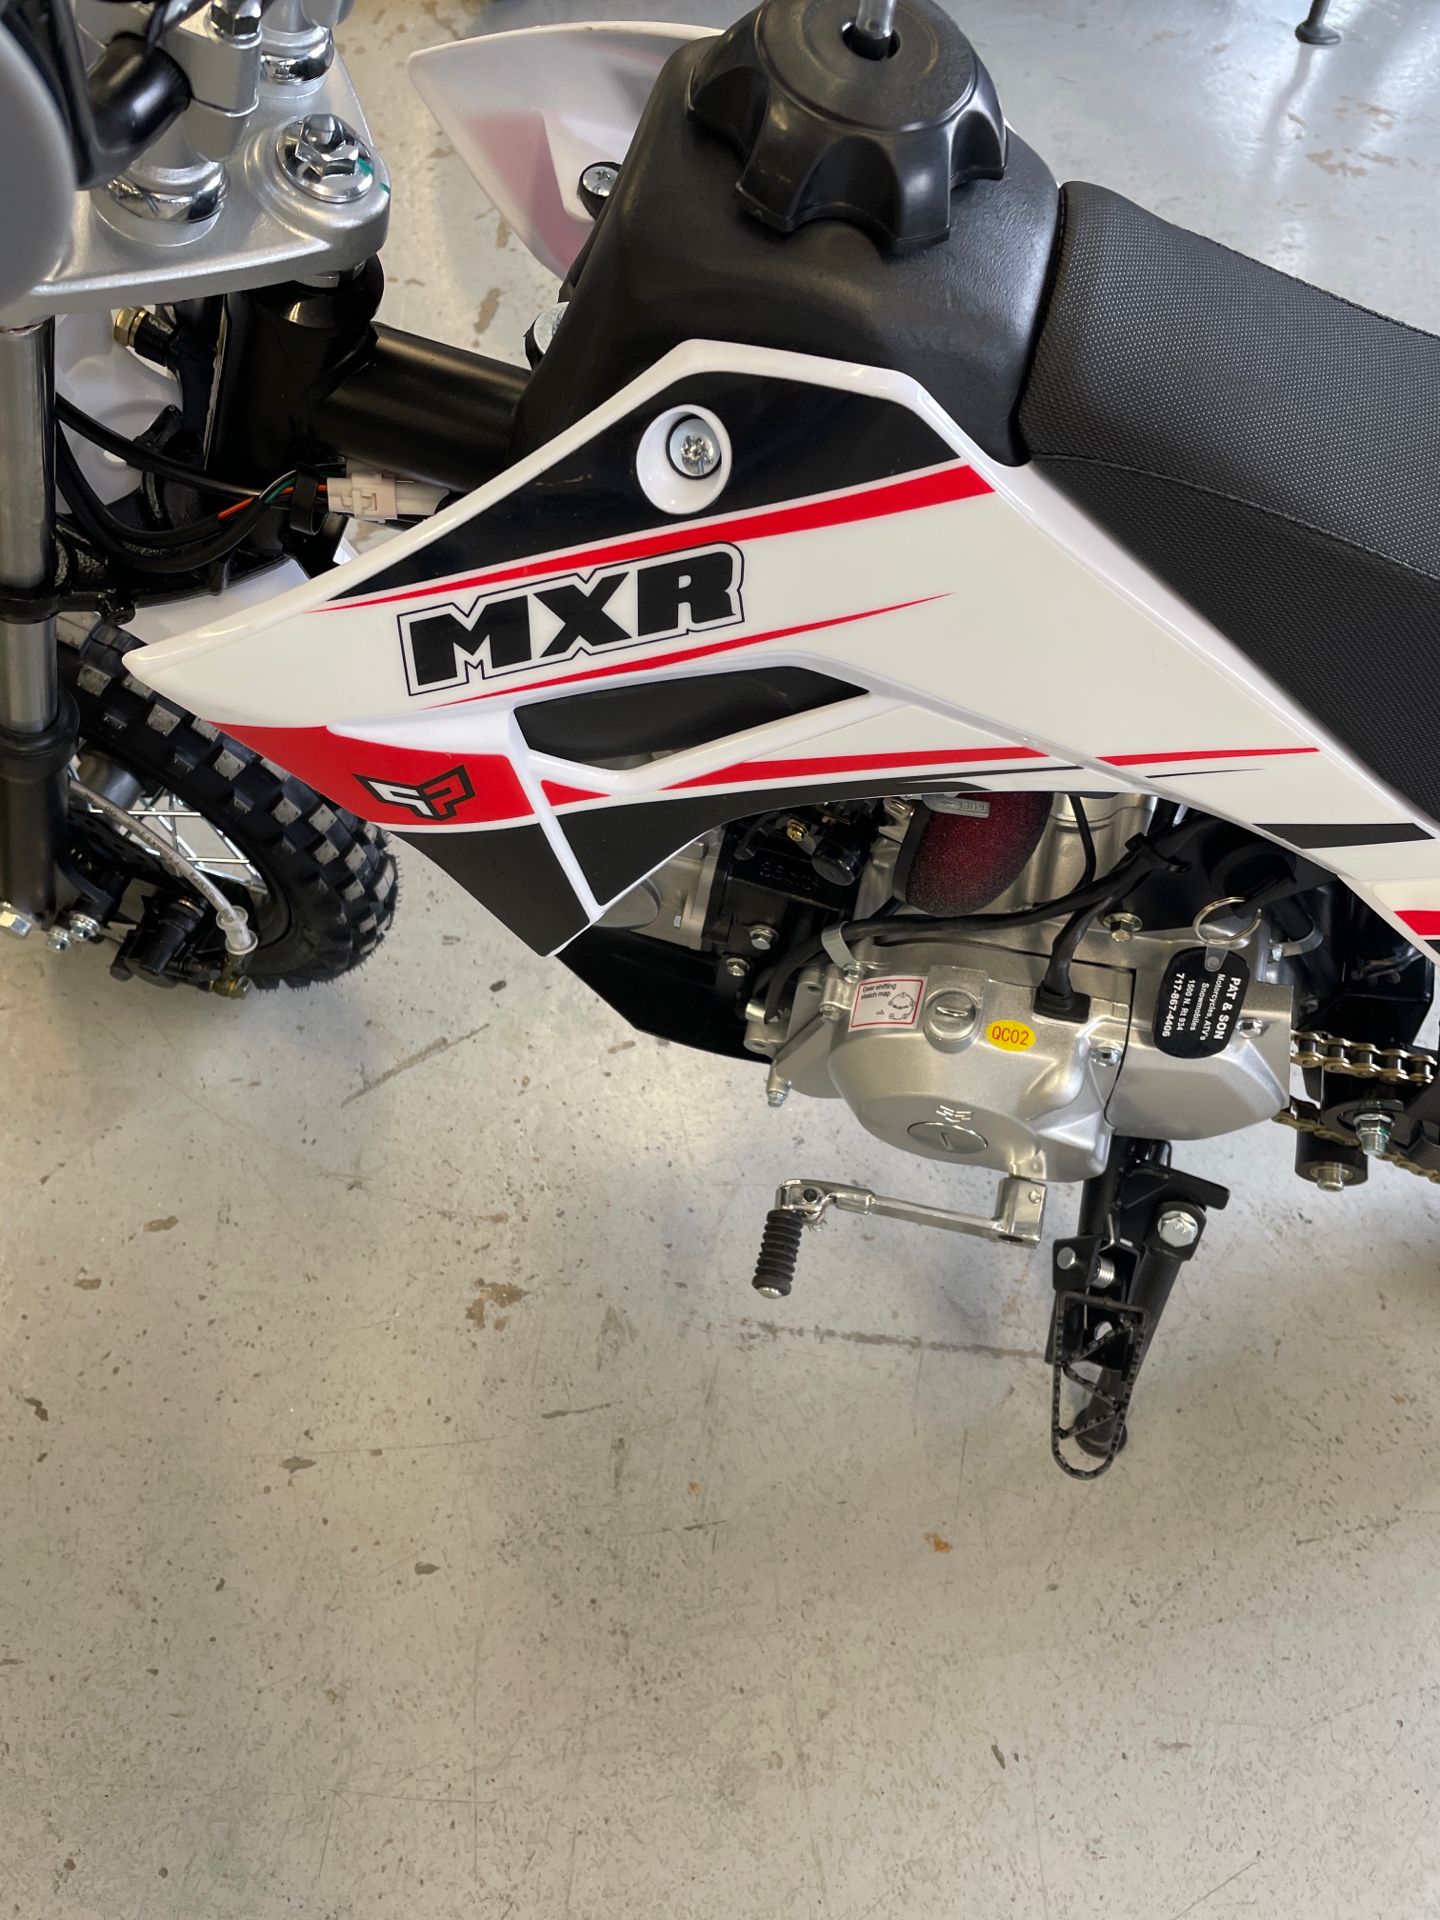 2021 Pitster Pro MXR 90 in Annville, Pennsylvania - Photo 8